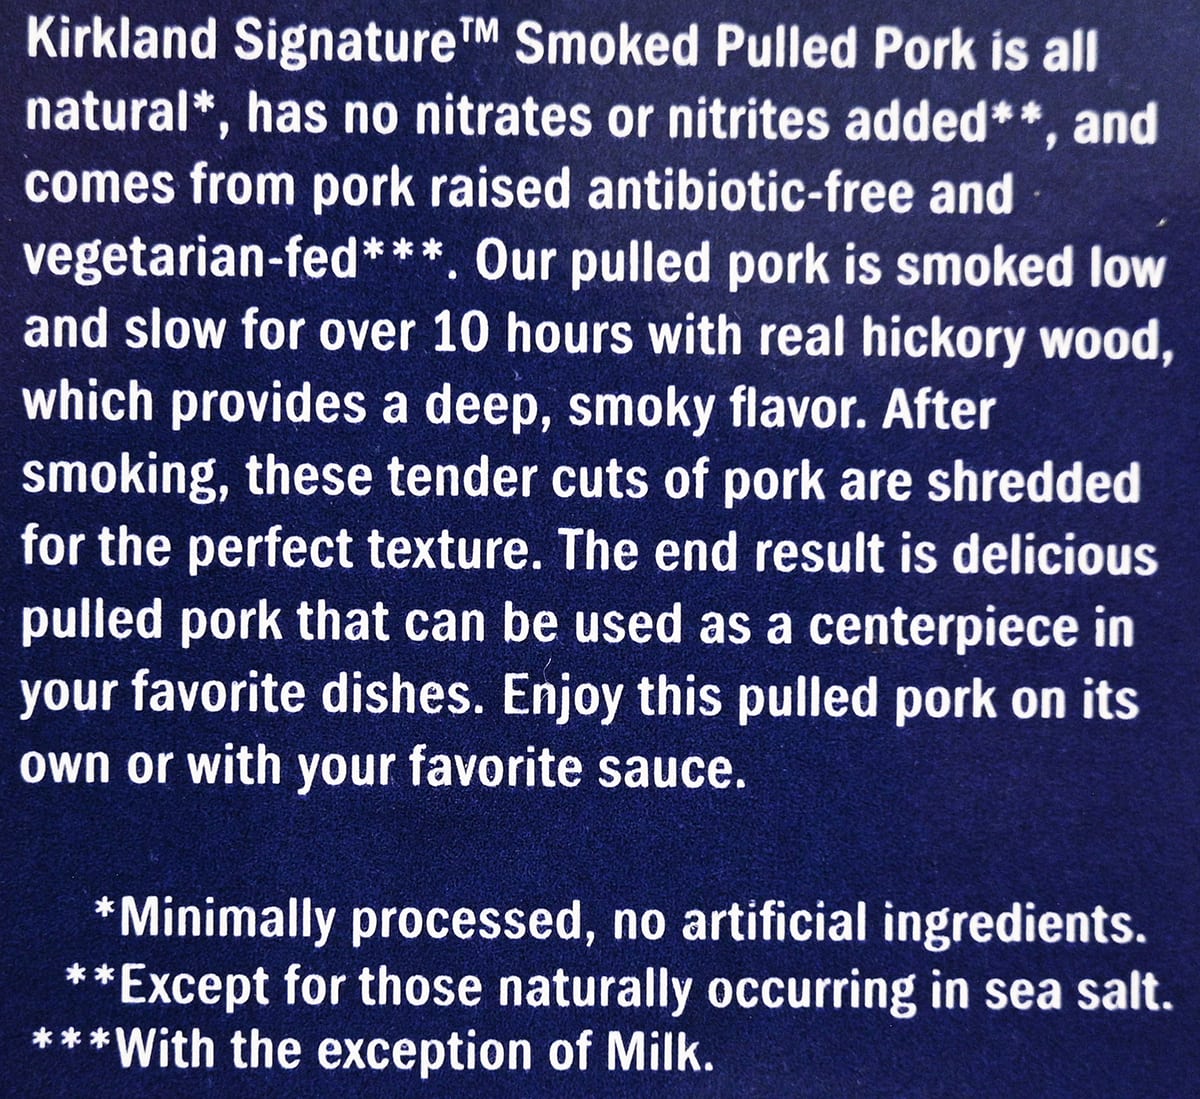 Image of the product description for the pulled pork from the back of the package.